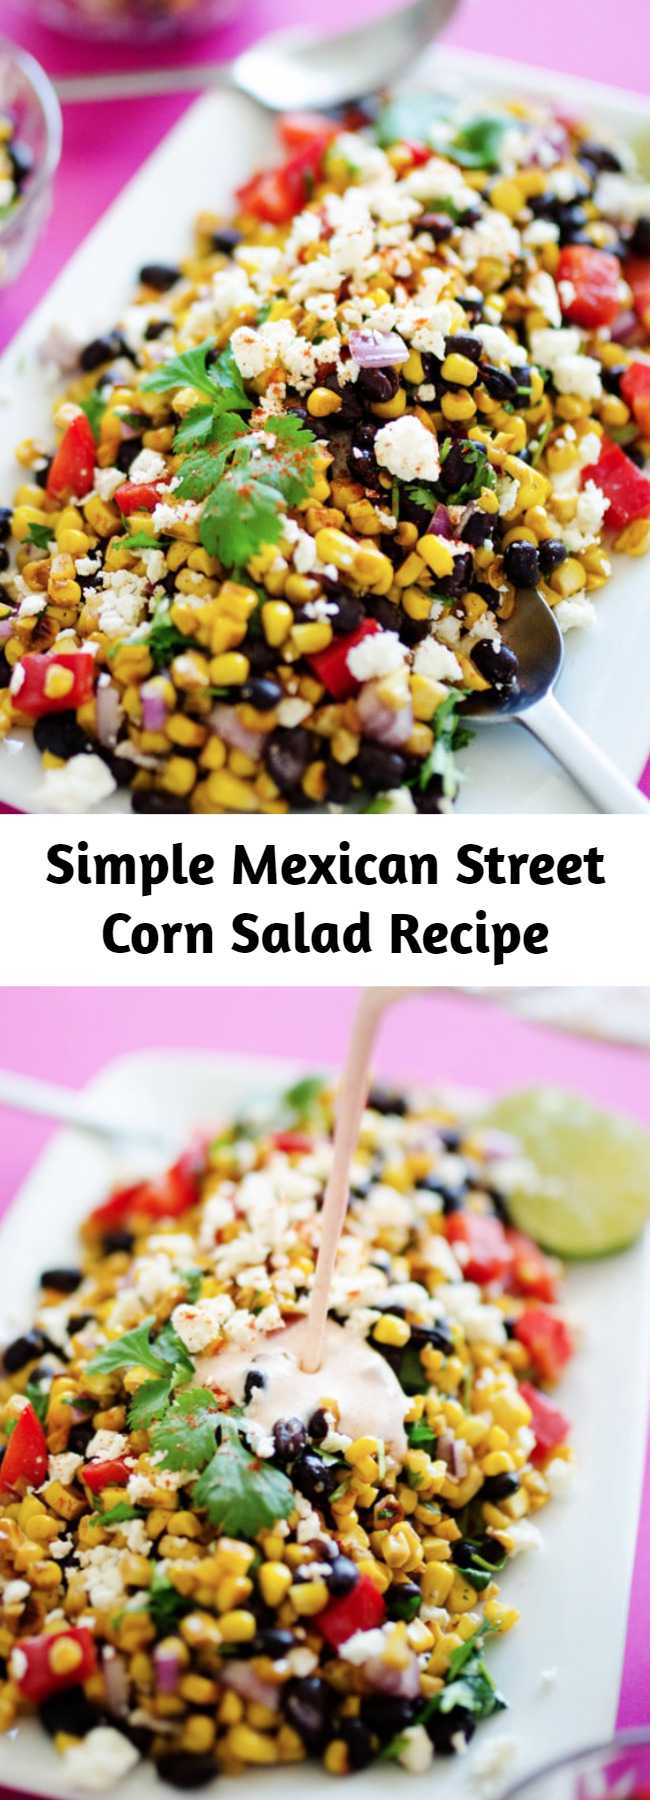 Simple Mexican Street Corn Salad Recipe - This Mexican Street Corn Salad is a healthy, simple take on elote, the delicious Mexican street vendor version of corn on the cob! #vegetarianrecipes #mexicanrecipes #texmex #healthy #dinner #potluck